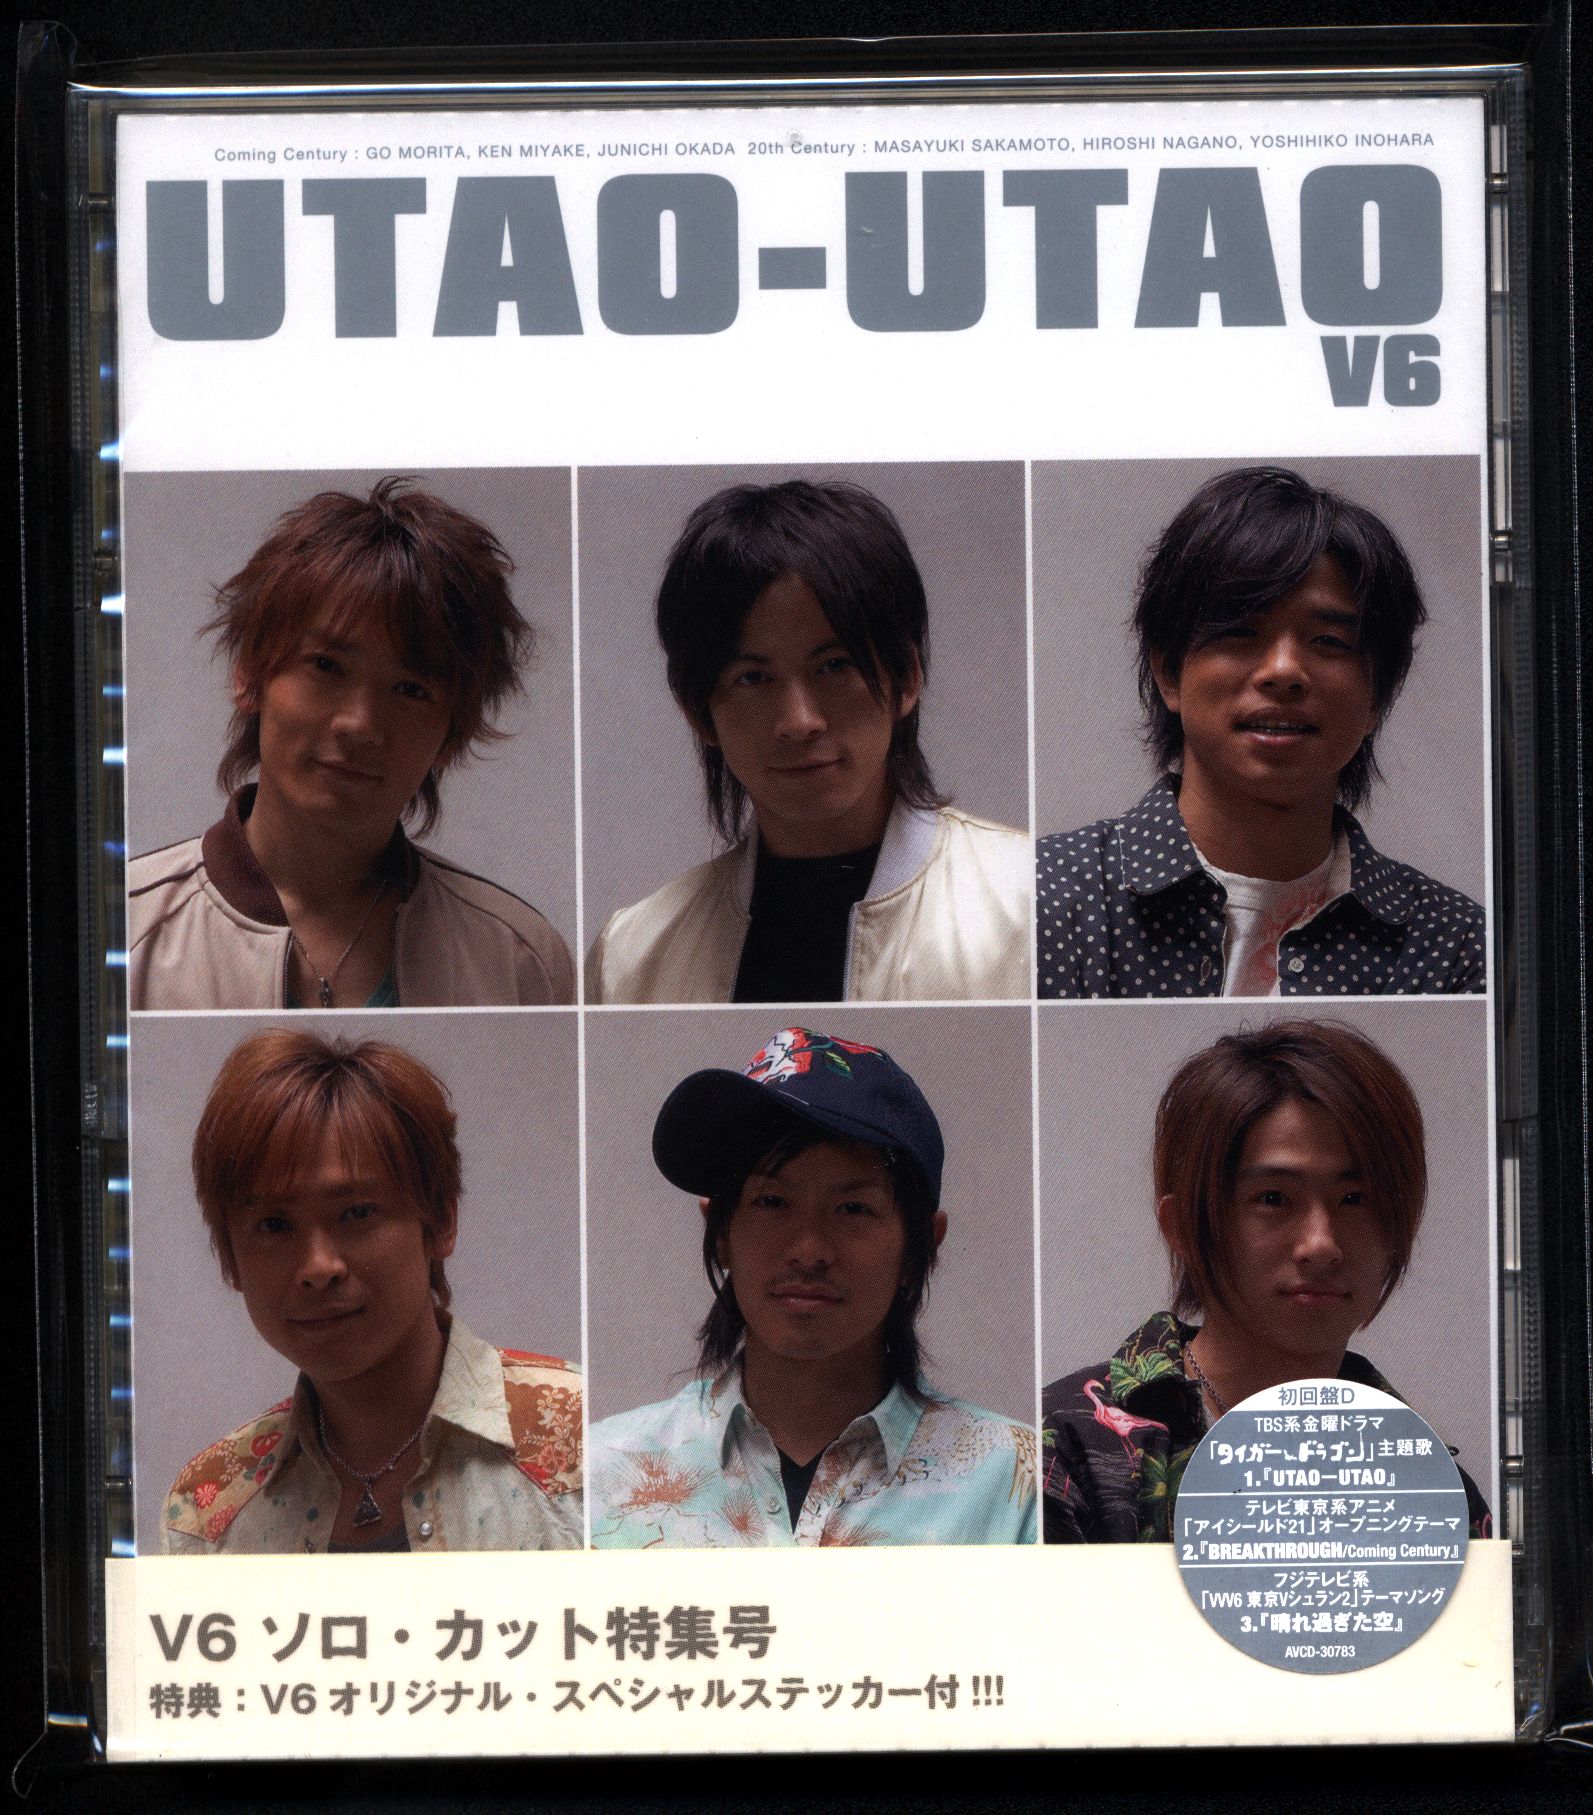 Utao Utao V6 First Edition Limited Edition Disc D Magazine Style Booklet V6 Solo Cut Special Feature No V6 Original Special With The Stickers Unopened Mandarake Online Shop